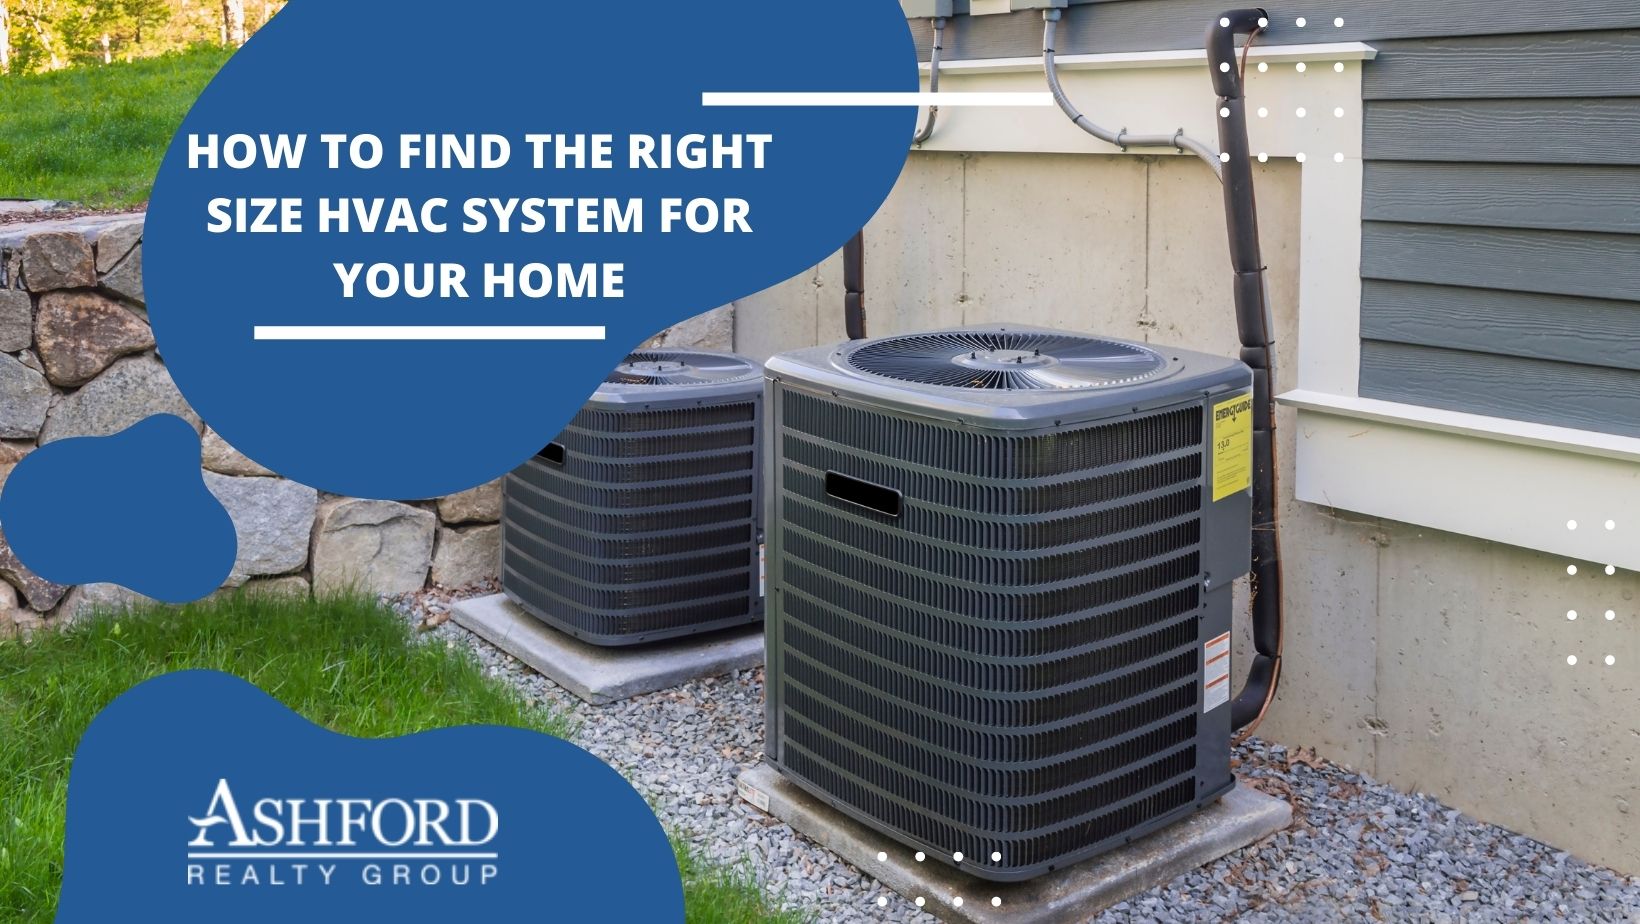 How to Find the Right Size HVAC System for Your Home